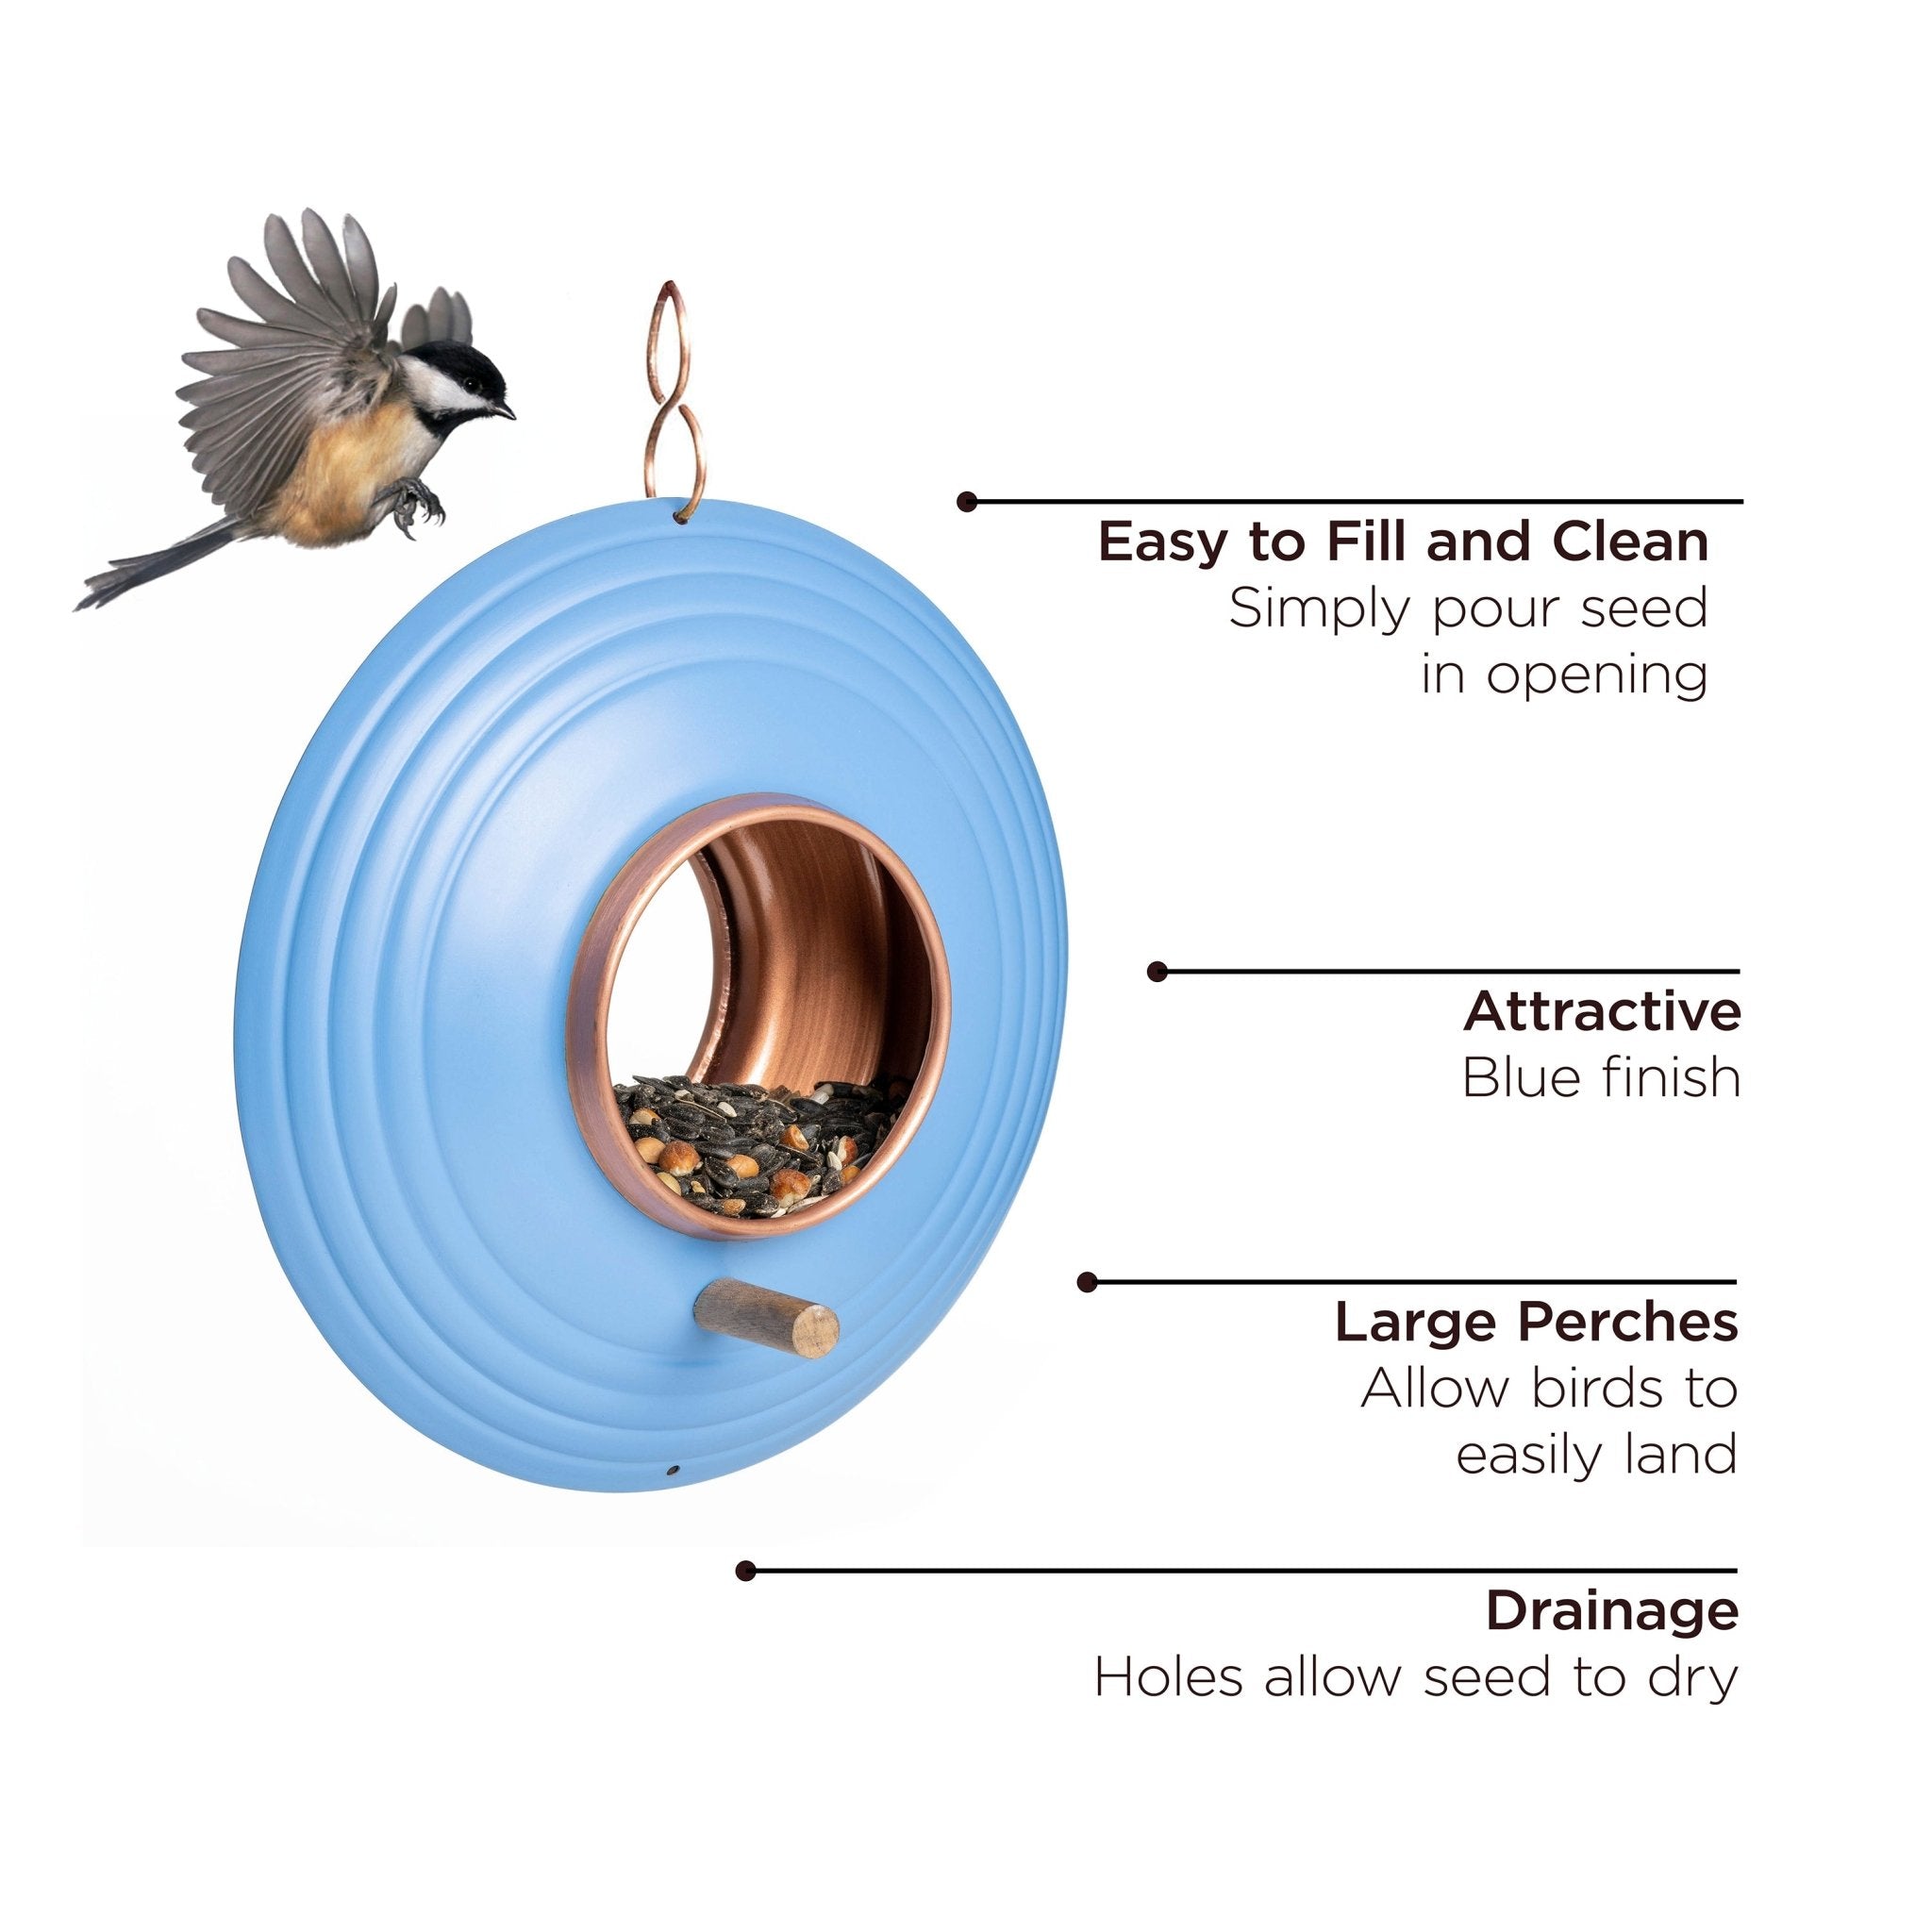 Azure Fly-Thru™ Bird Feeder, Copper Accents, Multiple Perches - Good Directions